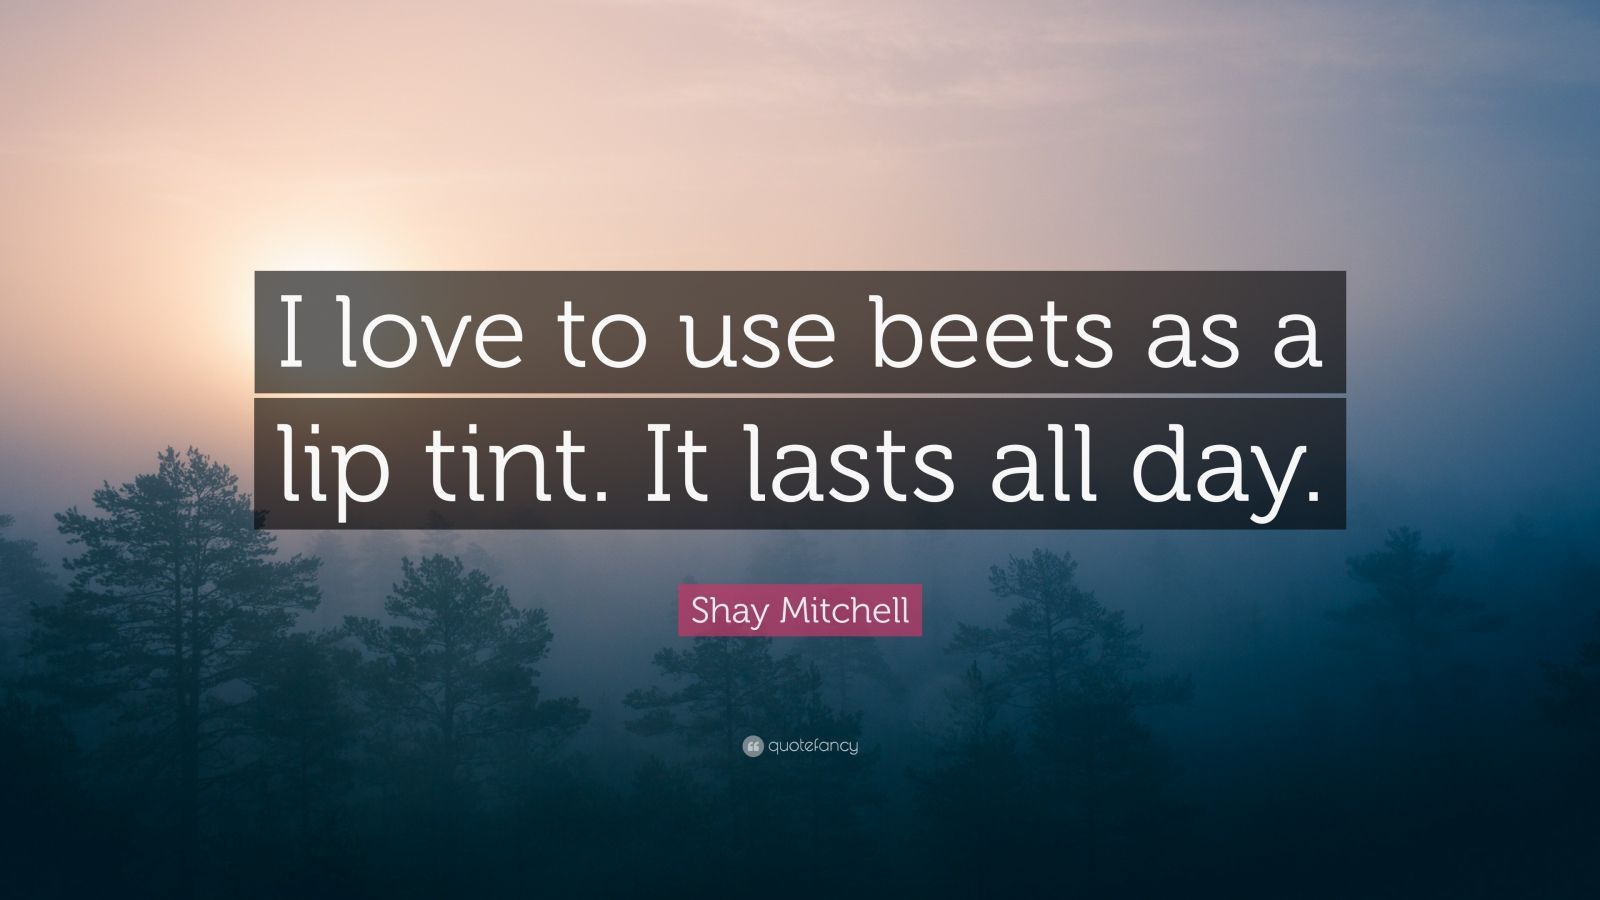 Shay Mitchell Quote: “I love to use beets as a lip tint. It lasts